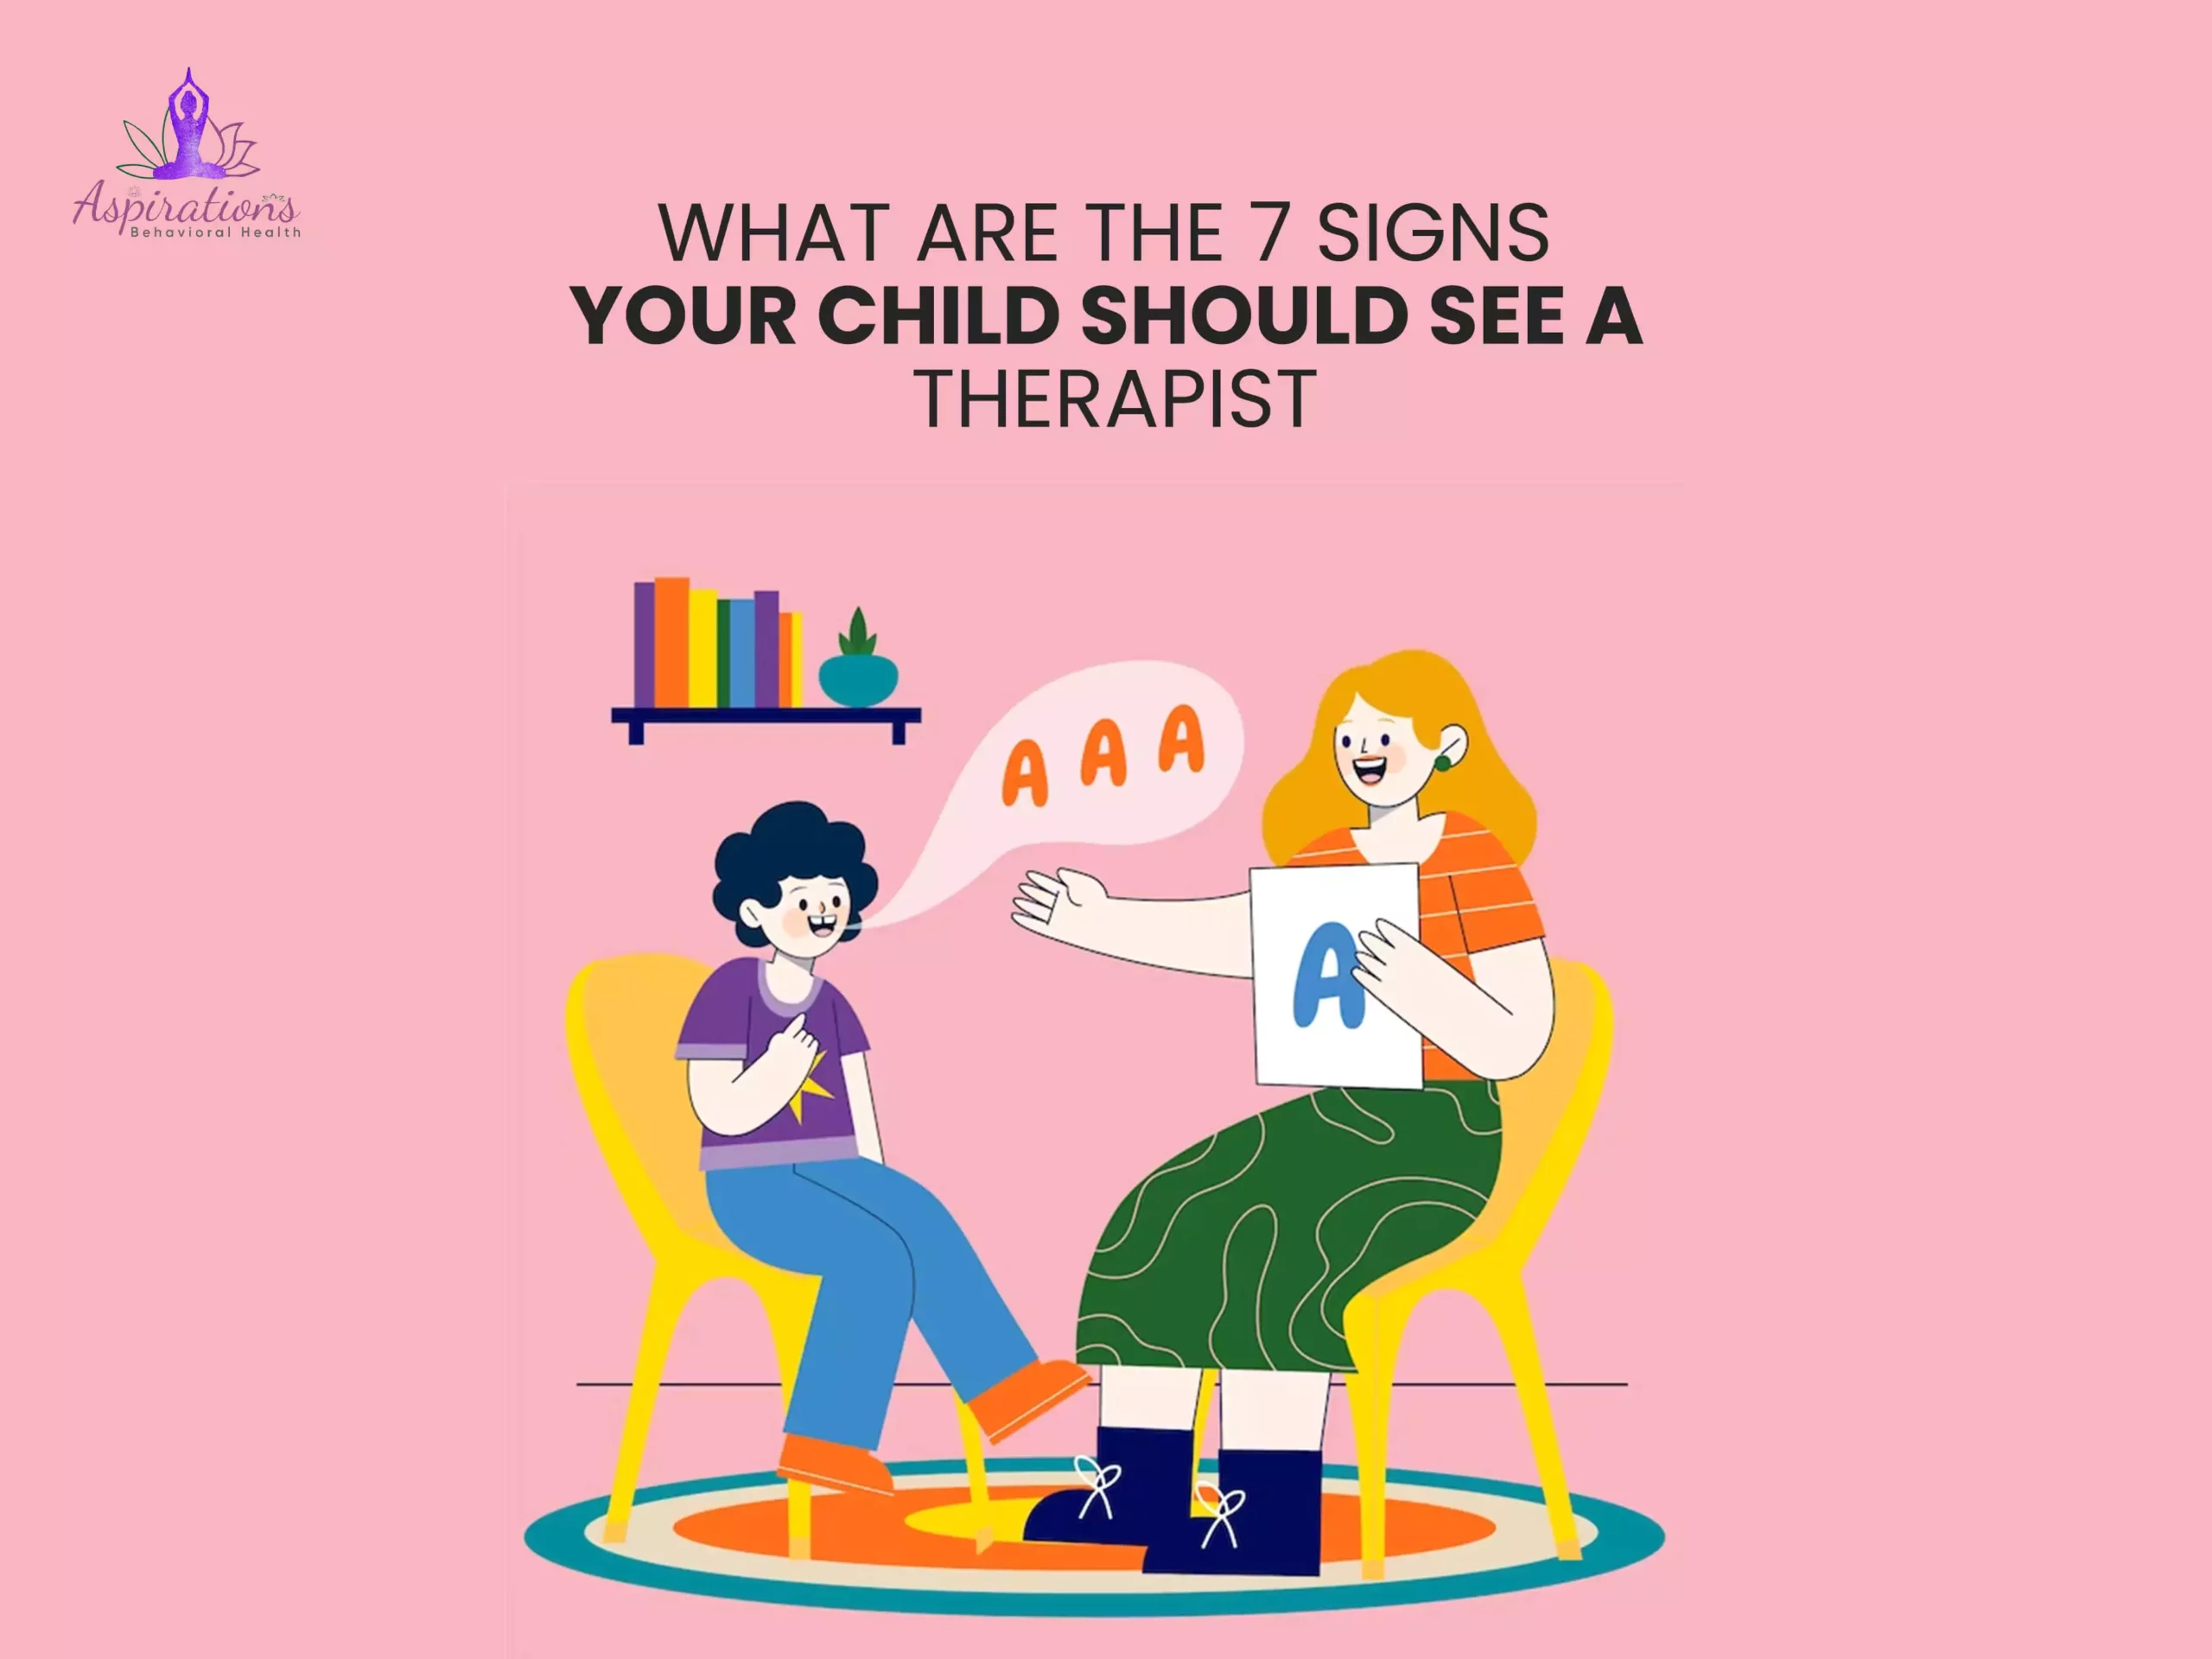 What Are The 7 Signs Your Child Should See A Therapist